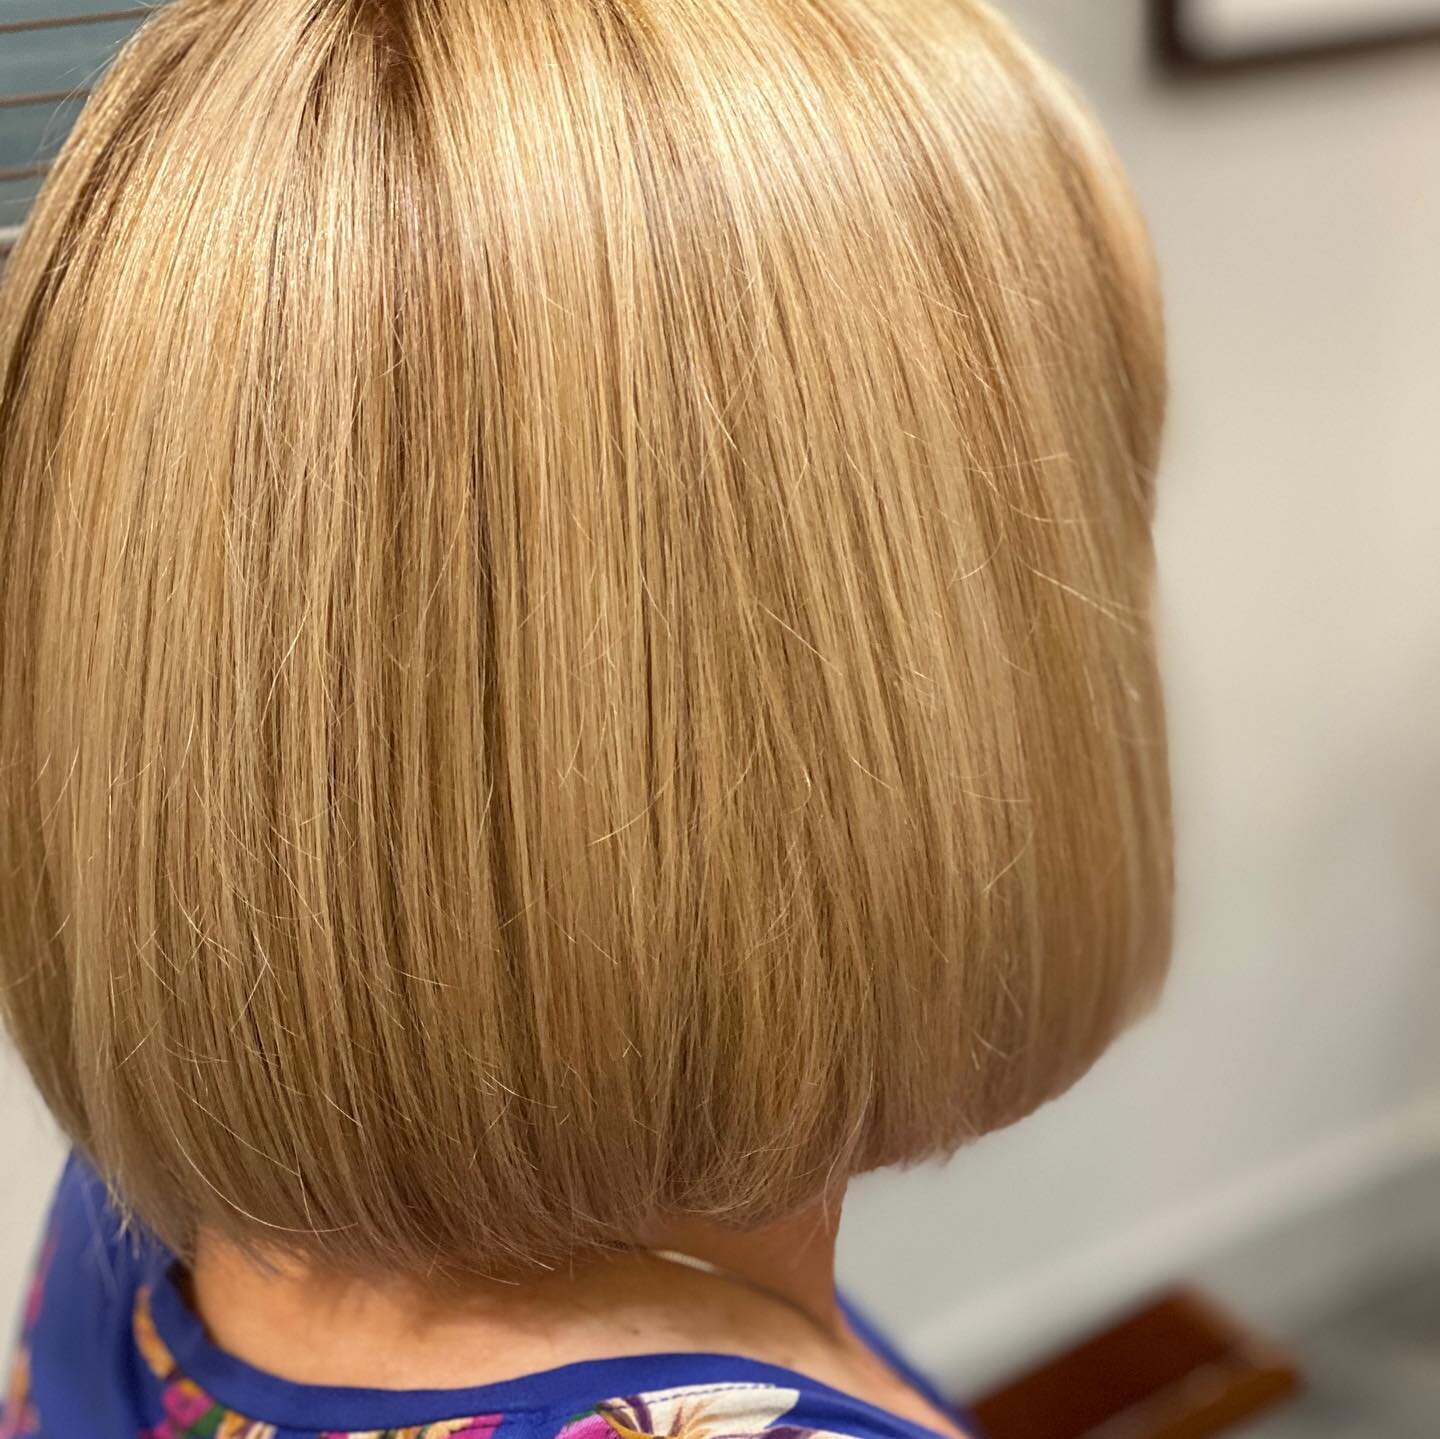 Toasted almond color, highlights and lowlights equals another very beautiful happy guest! #milkshakecreativecolor #summervibes #postquamprofessional #stayingsafe #lovinhair #blondehair @holyokecommunitycollege @easthamptonma.daily